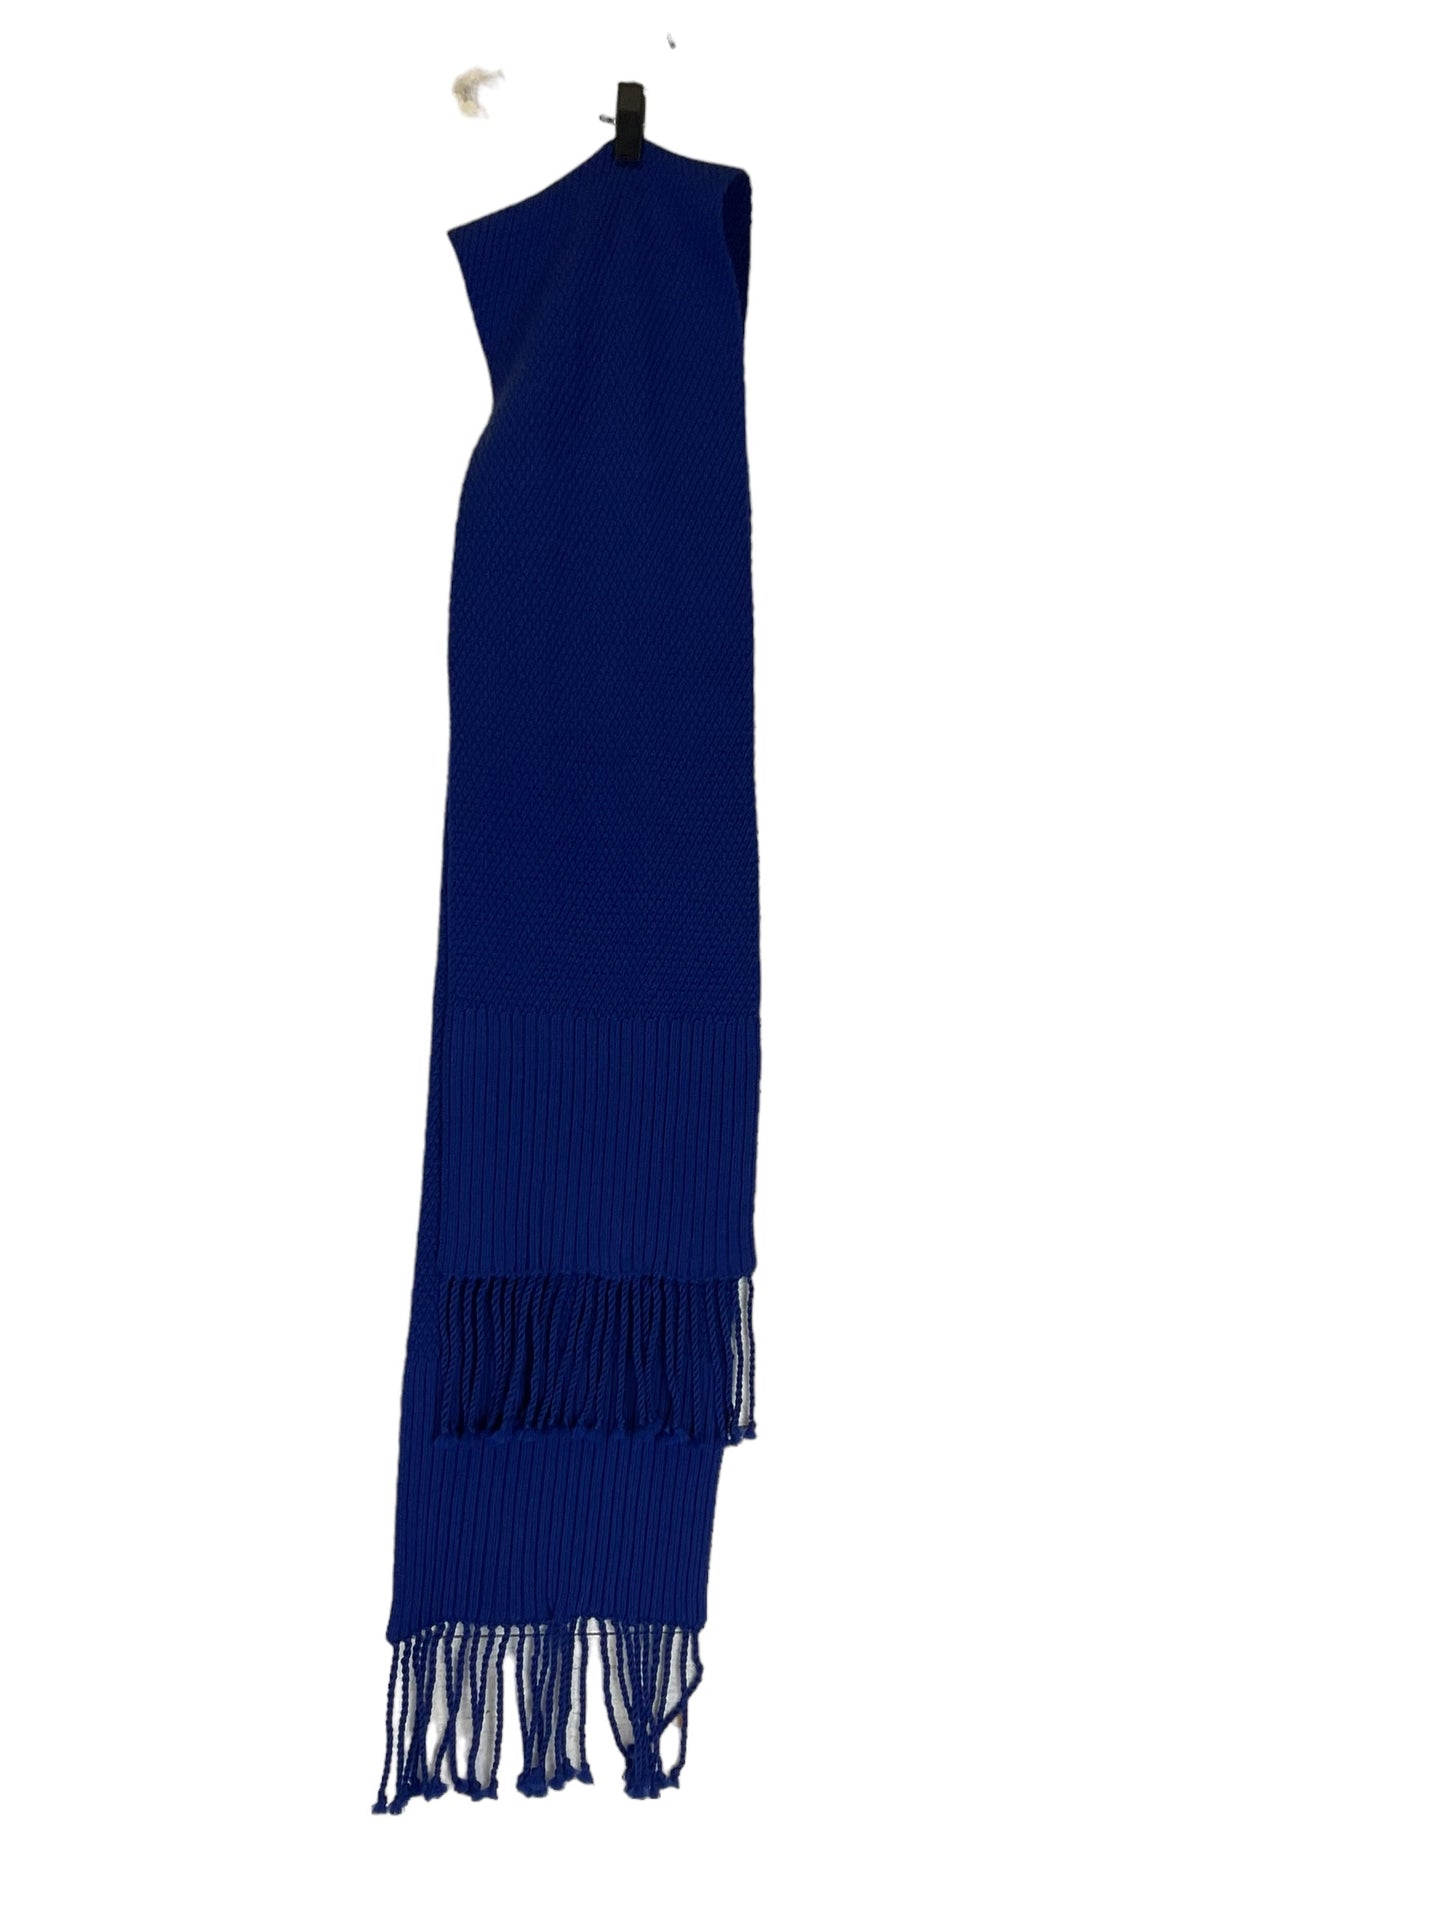 Scarf Long By Patagonia